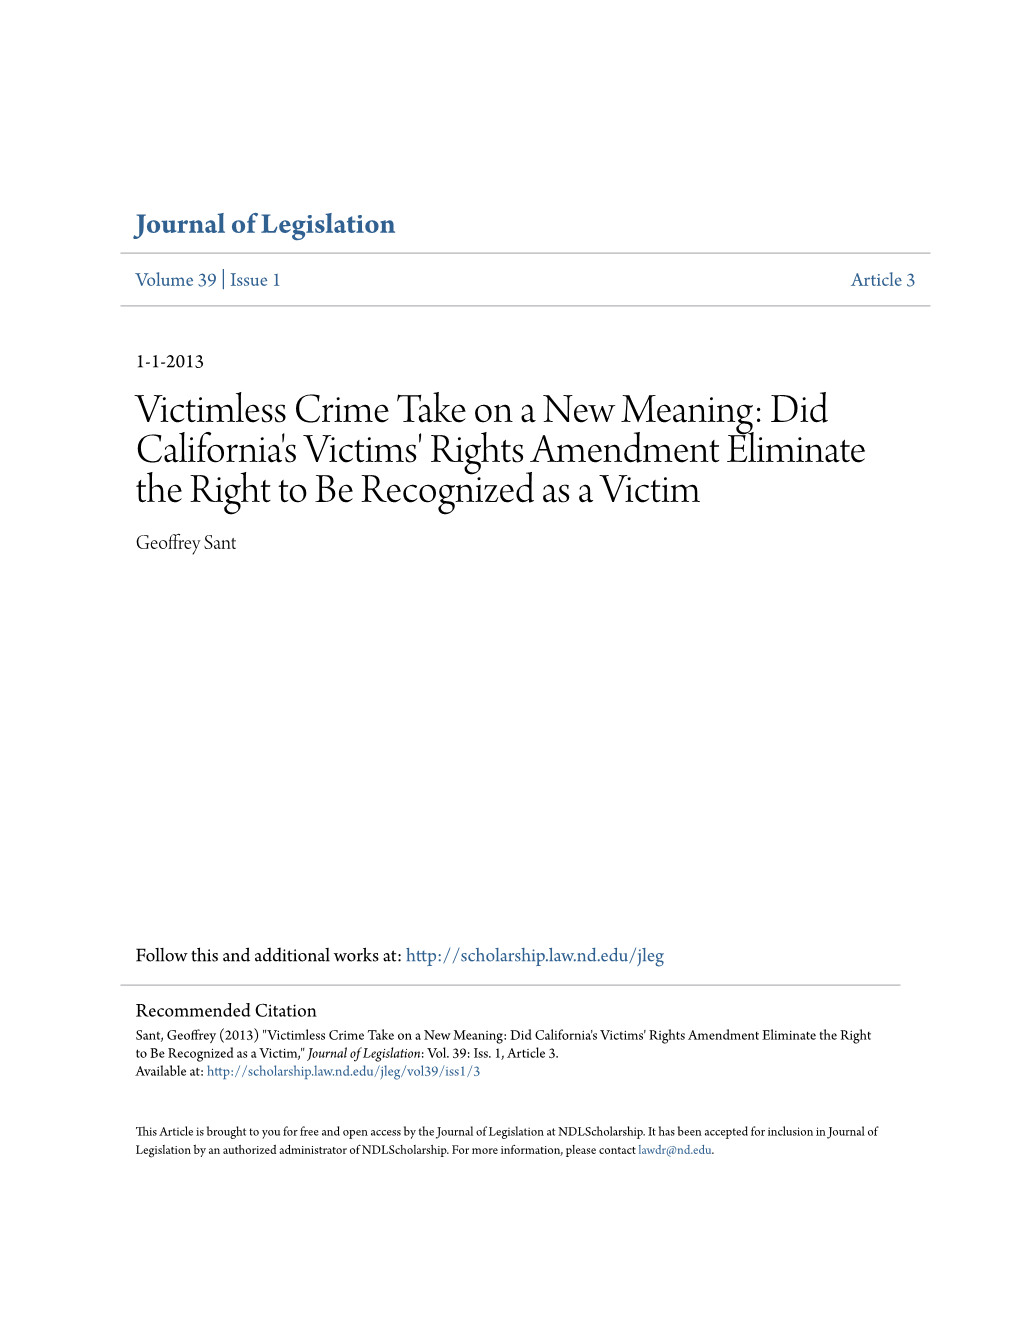 Victimless Crime Take on a New Meaning: Did California's Victims' Rights Amendment Eliminate the Right to Be Recognized As a Victim Geoffrey Sant